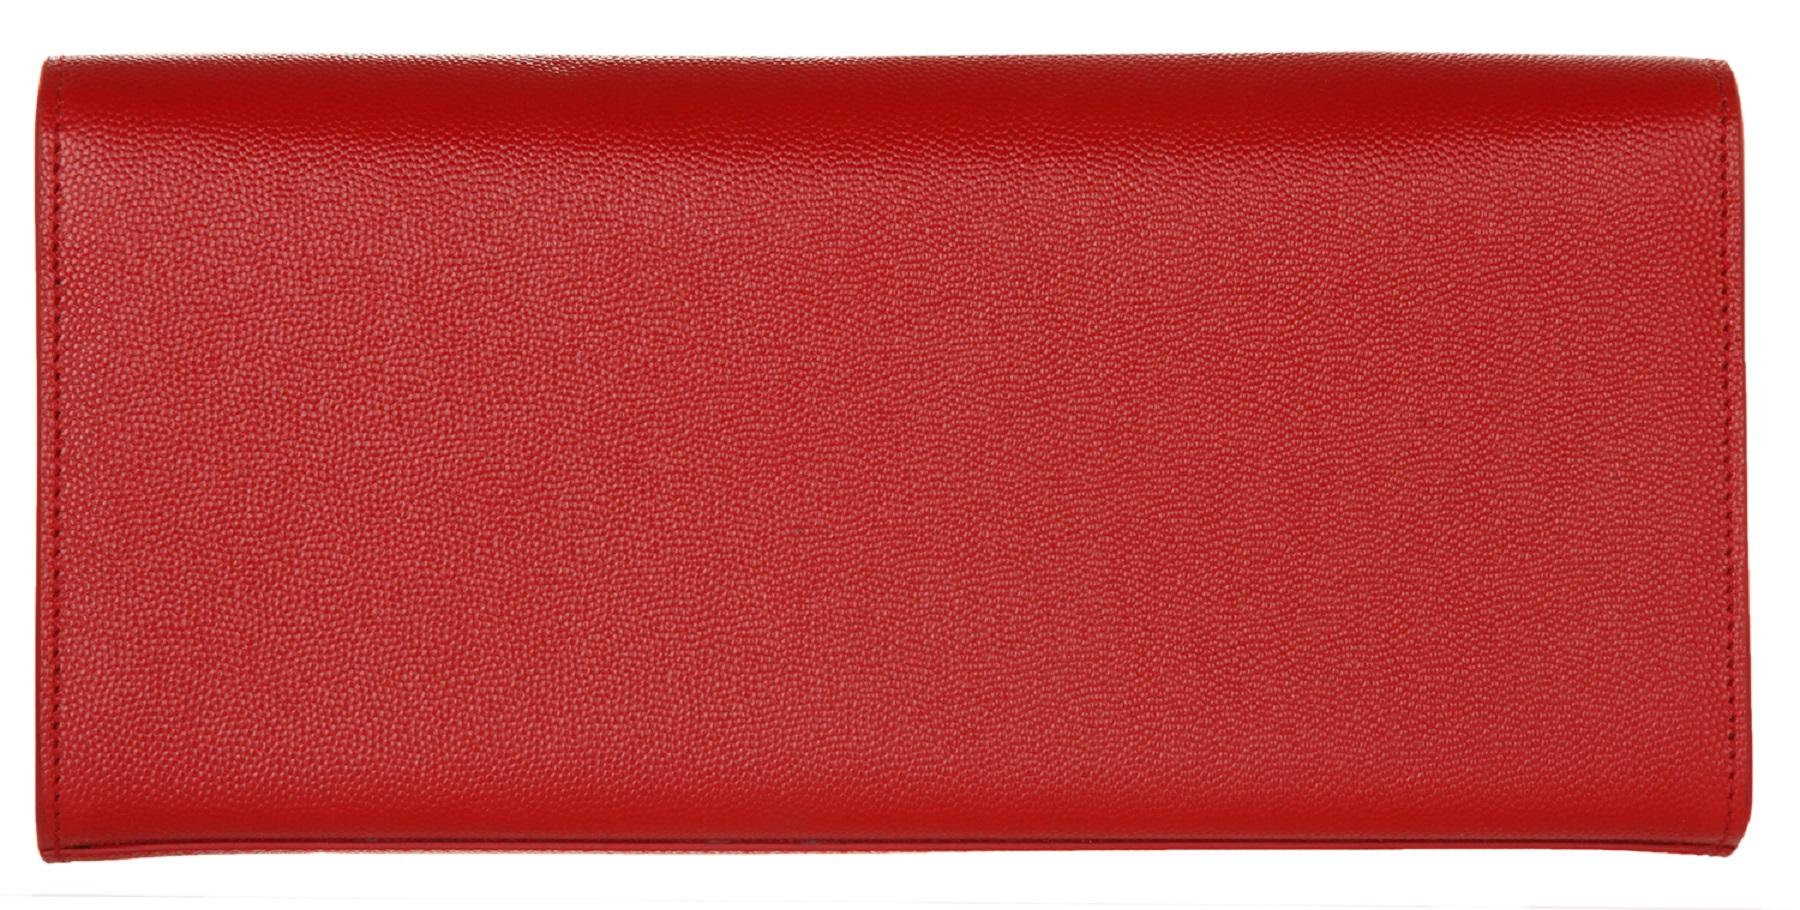 Saint Laurent Women Clutch Monogram Kate
Item number YSL002 Color red
Exterior Calfskin
Lining Canvas
Compartments: 1 main compartment; 1 slide compartment
Dimensions (width/height/depth) 27/12,5/5
Closure Magnetic Button snap closure
Weight in